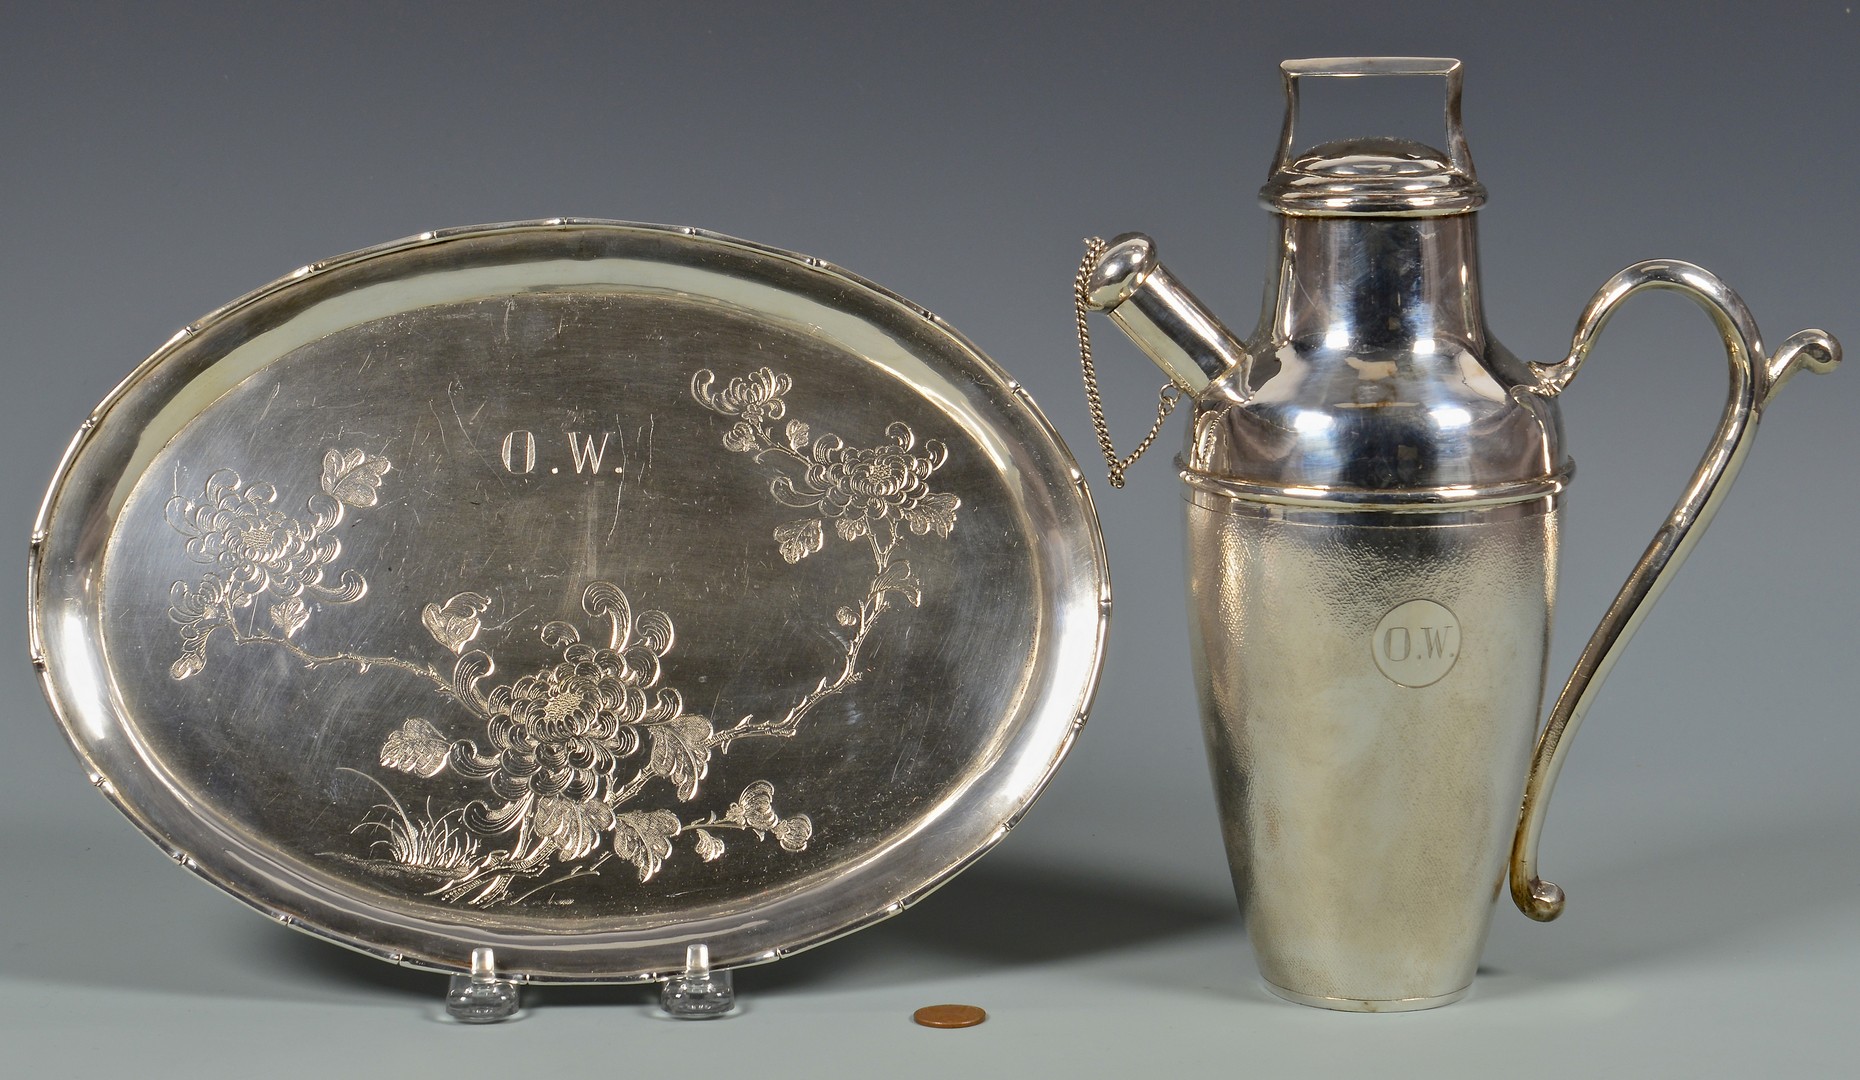 Lot 33: Chinese Silver Cocktail Shaker and Tray